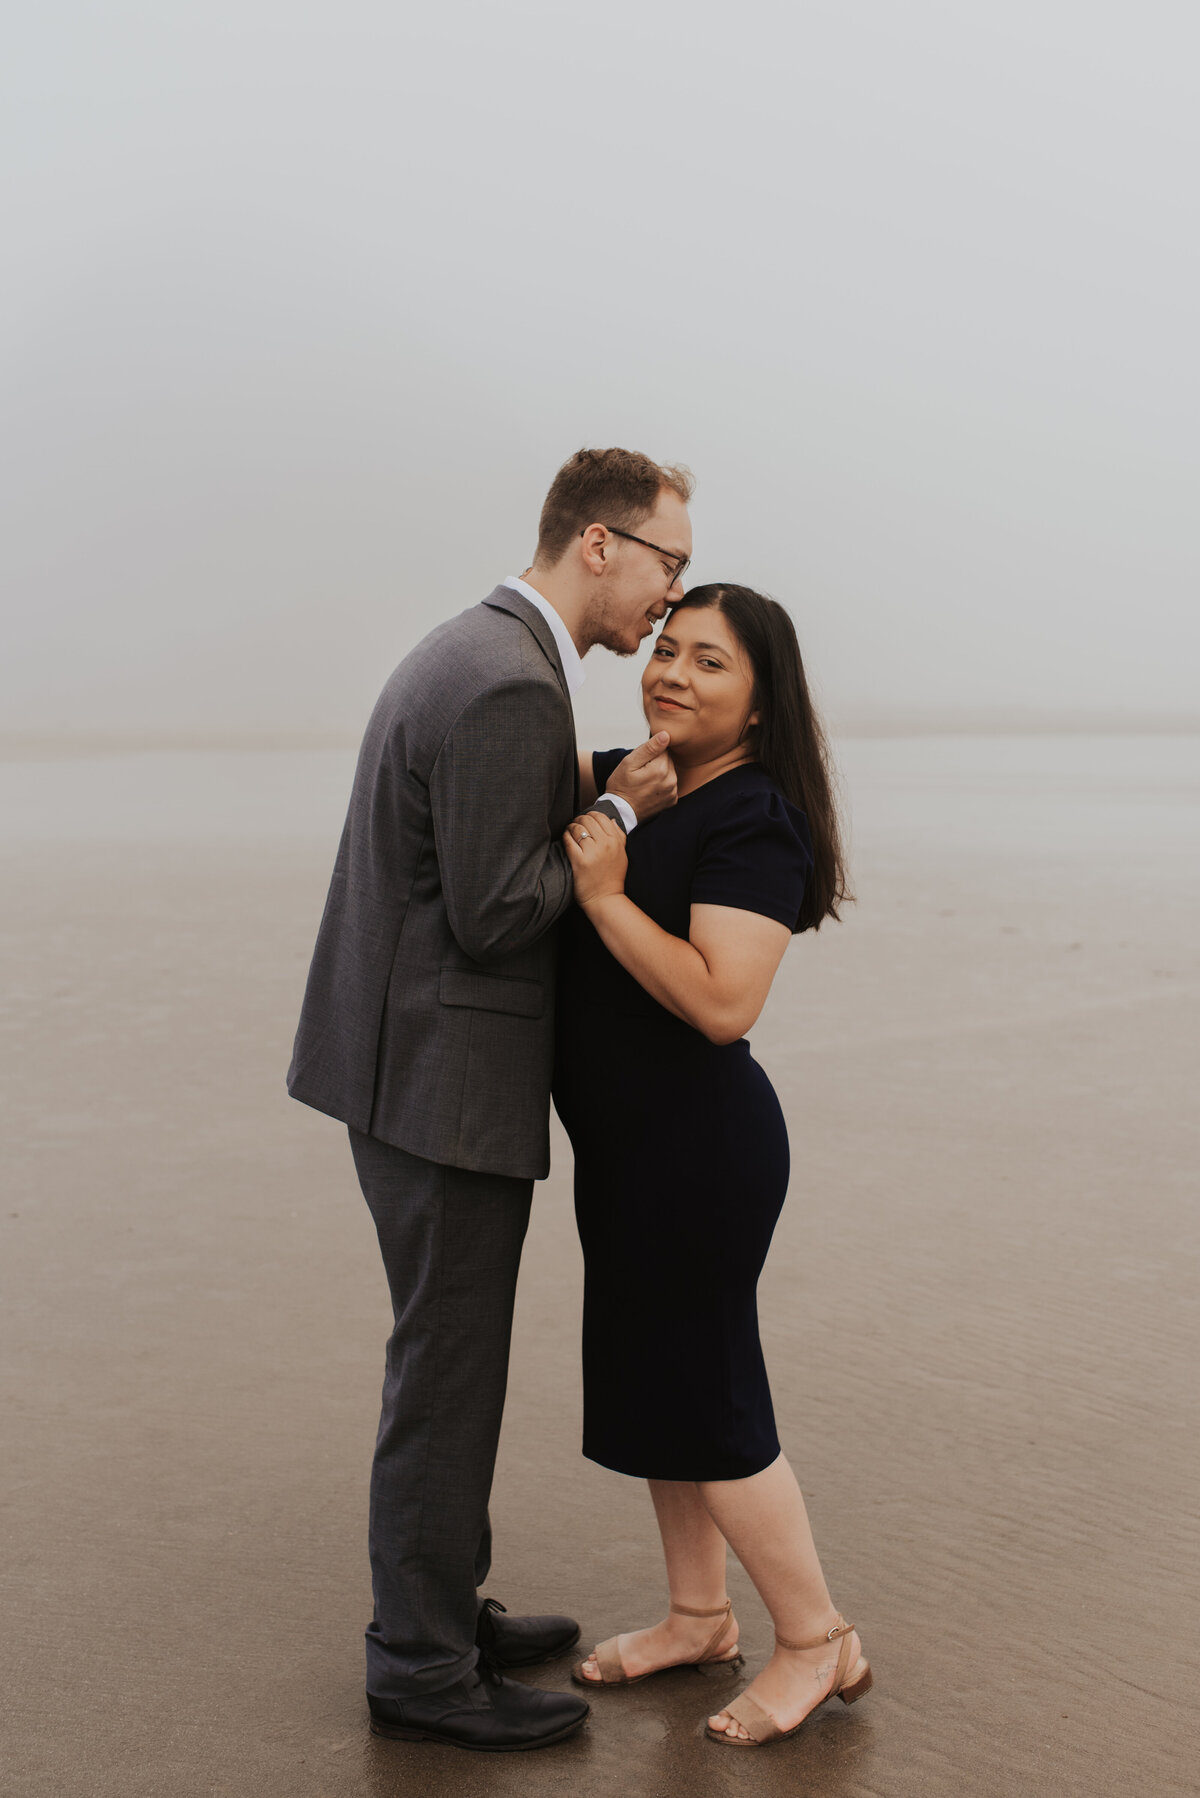 Maria-and-David-adventure-session-cannon-beach-oregon-by-bruna-kitchen-photography-14